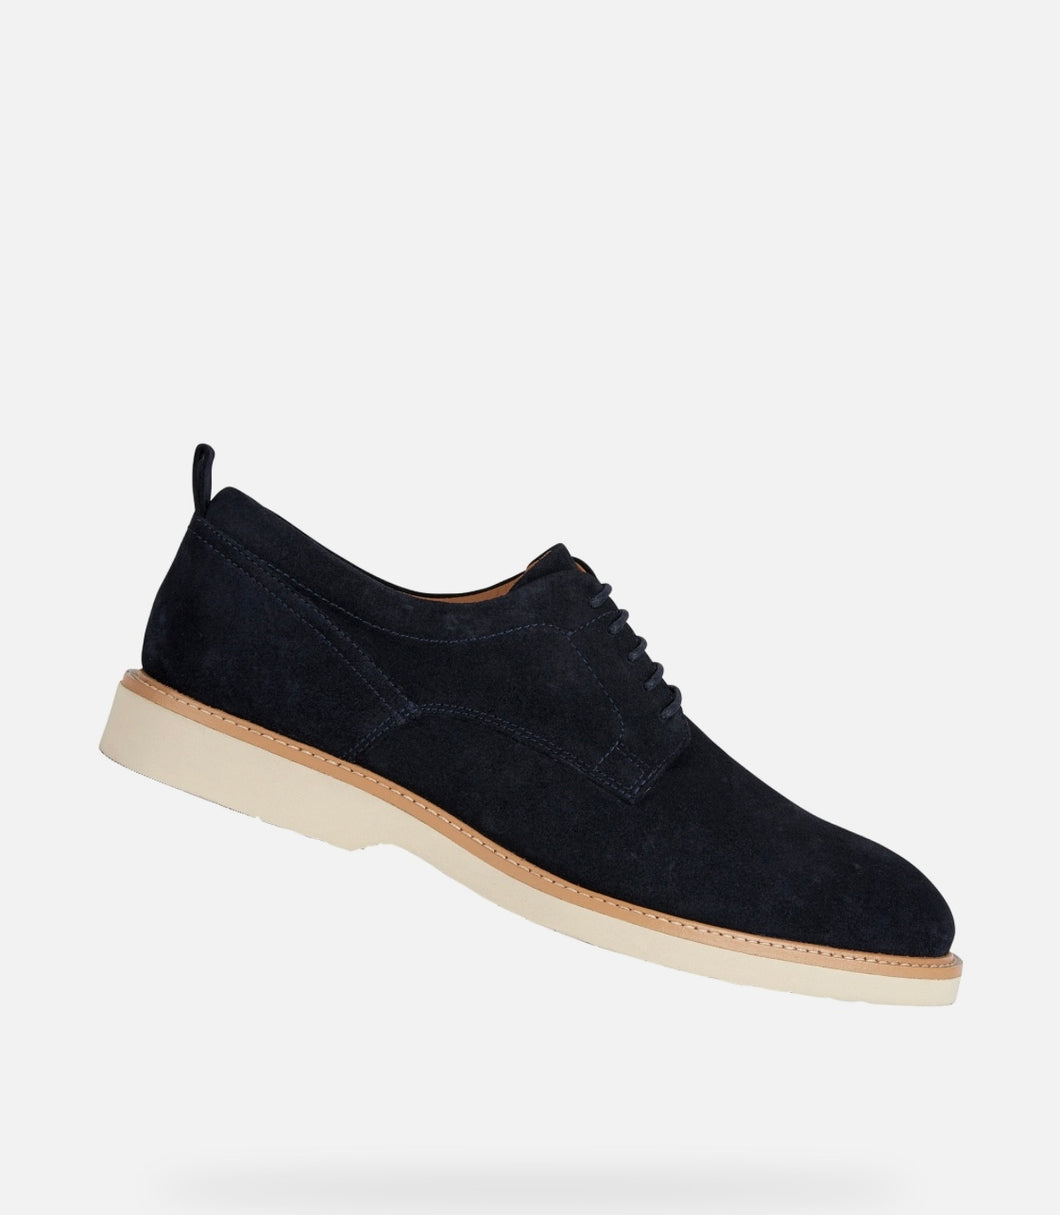 New Geox Navy Suede Lace Up Shoe